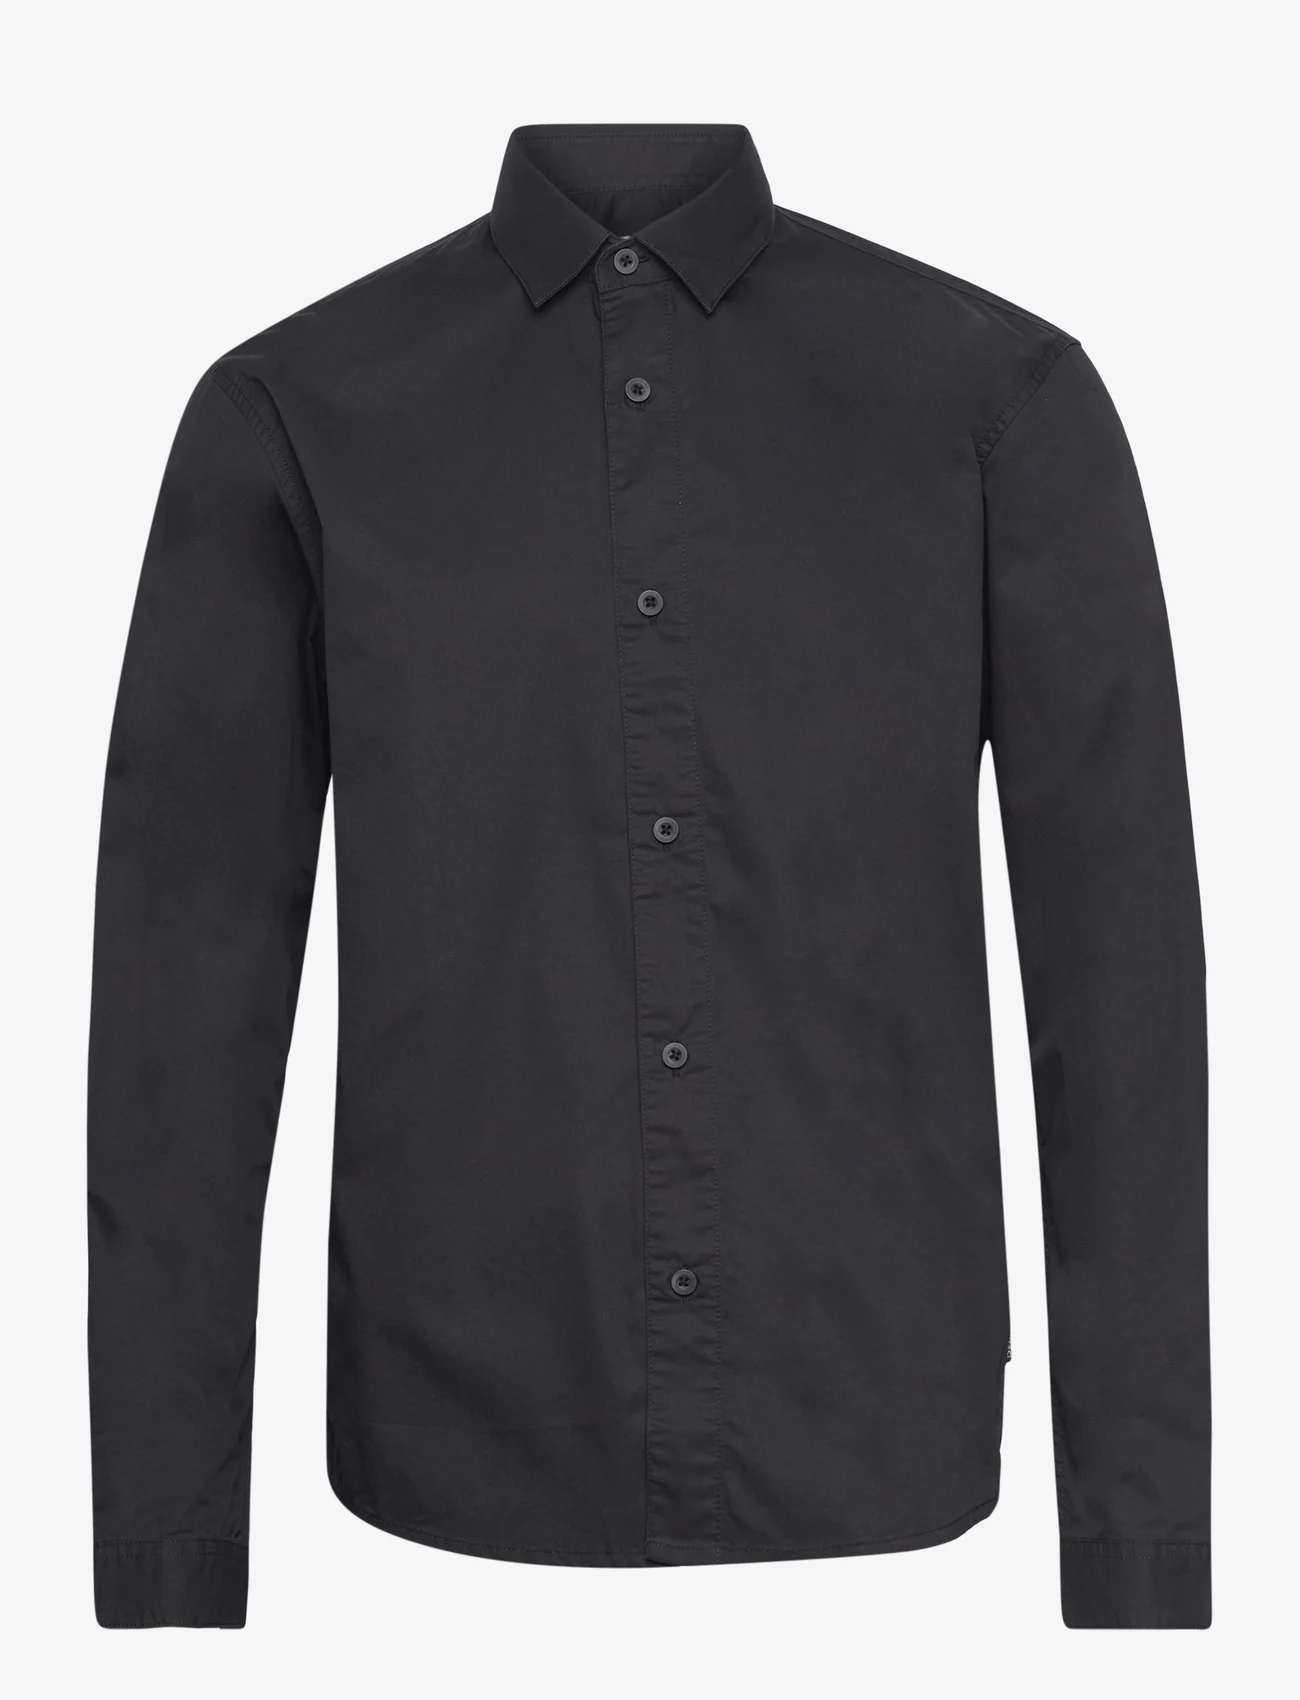 Tom Tailor - relaxed pape - casual skjortor - black - 0